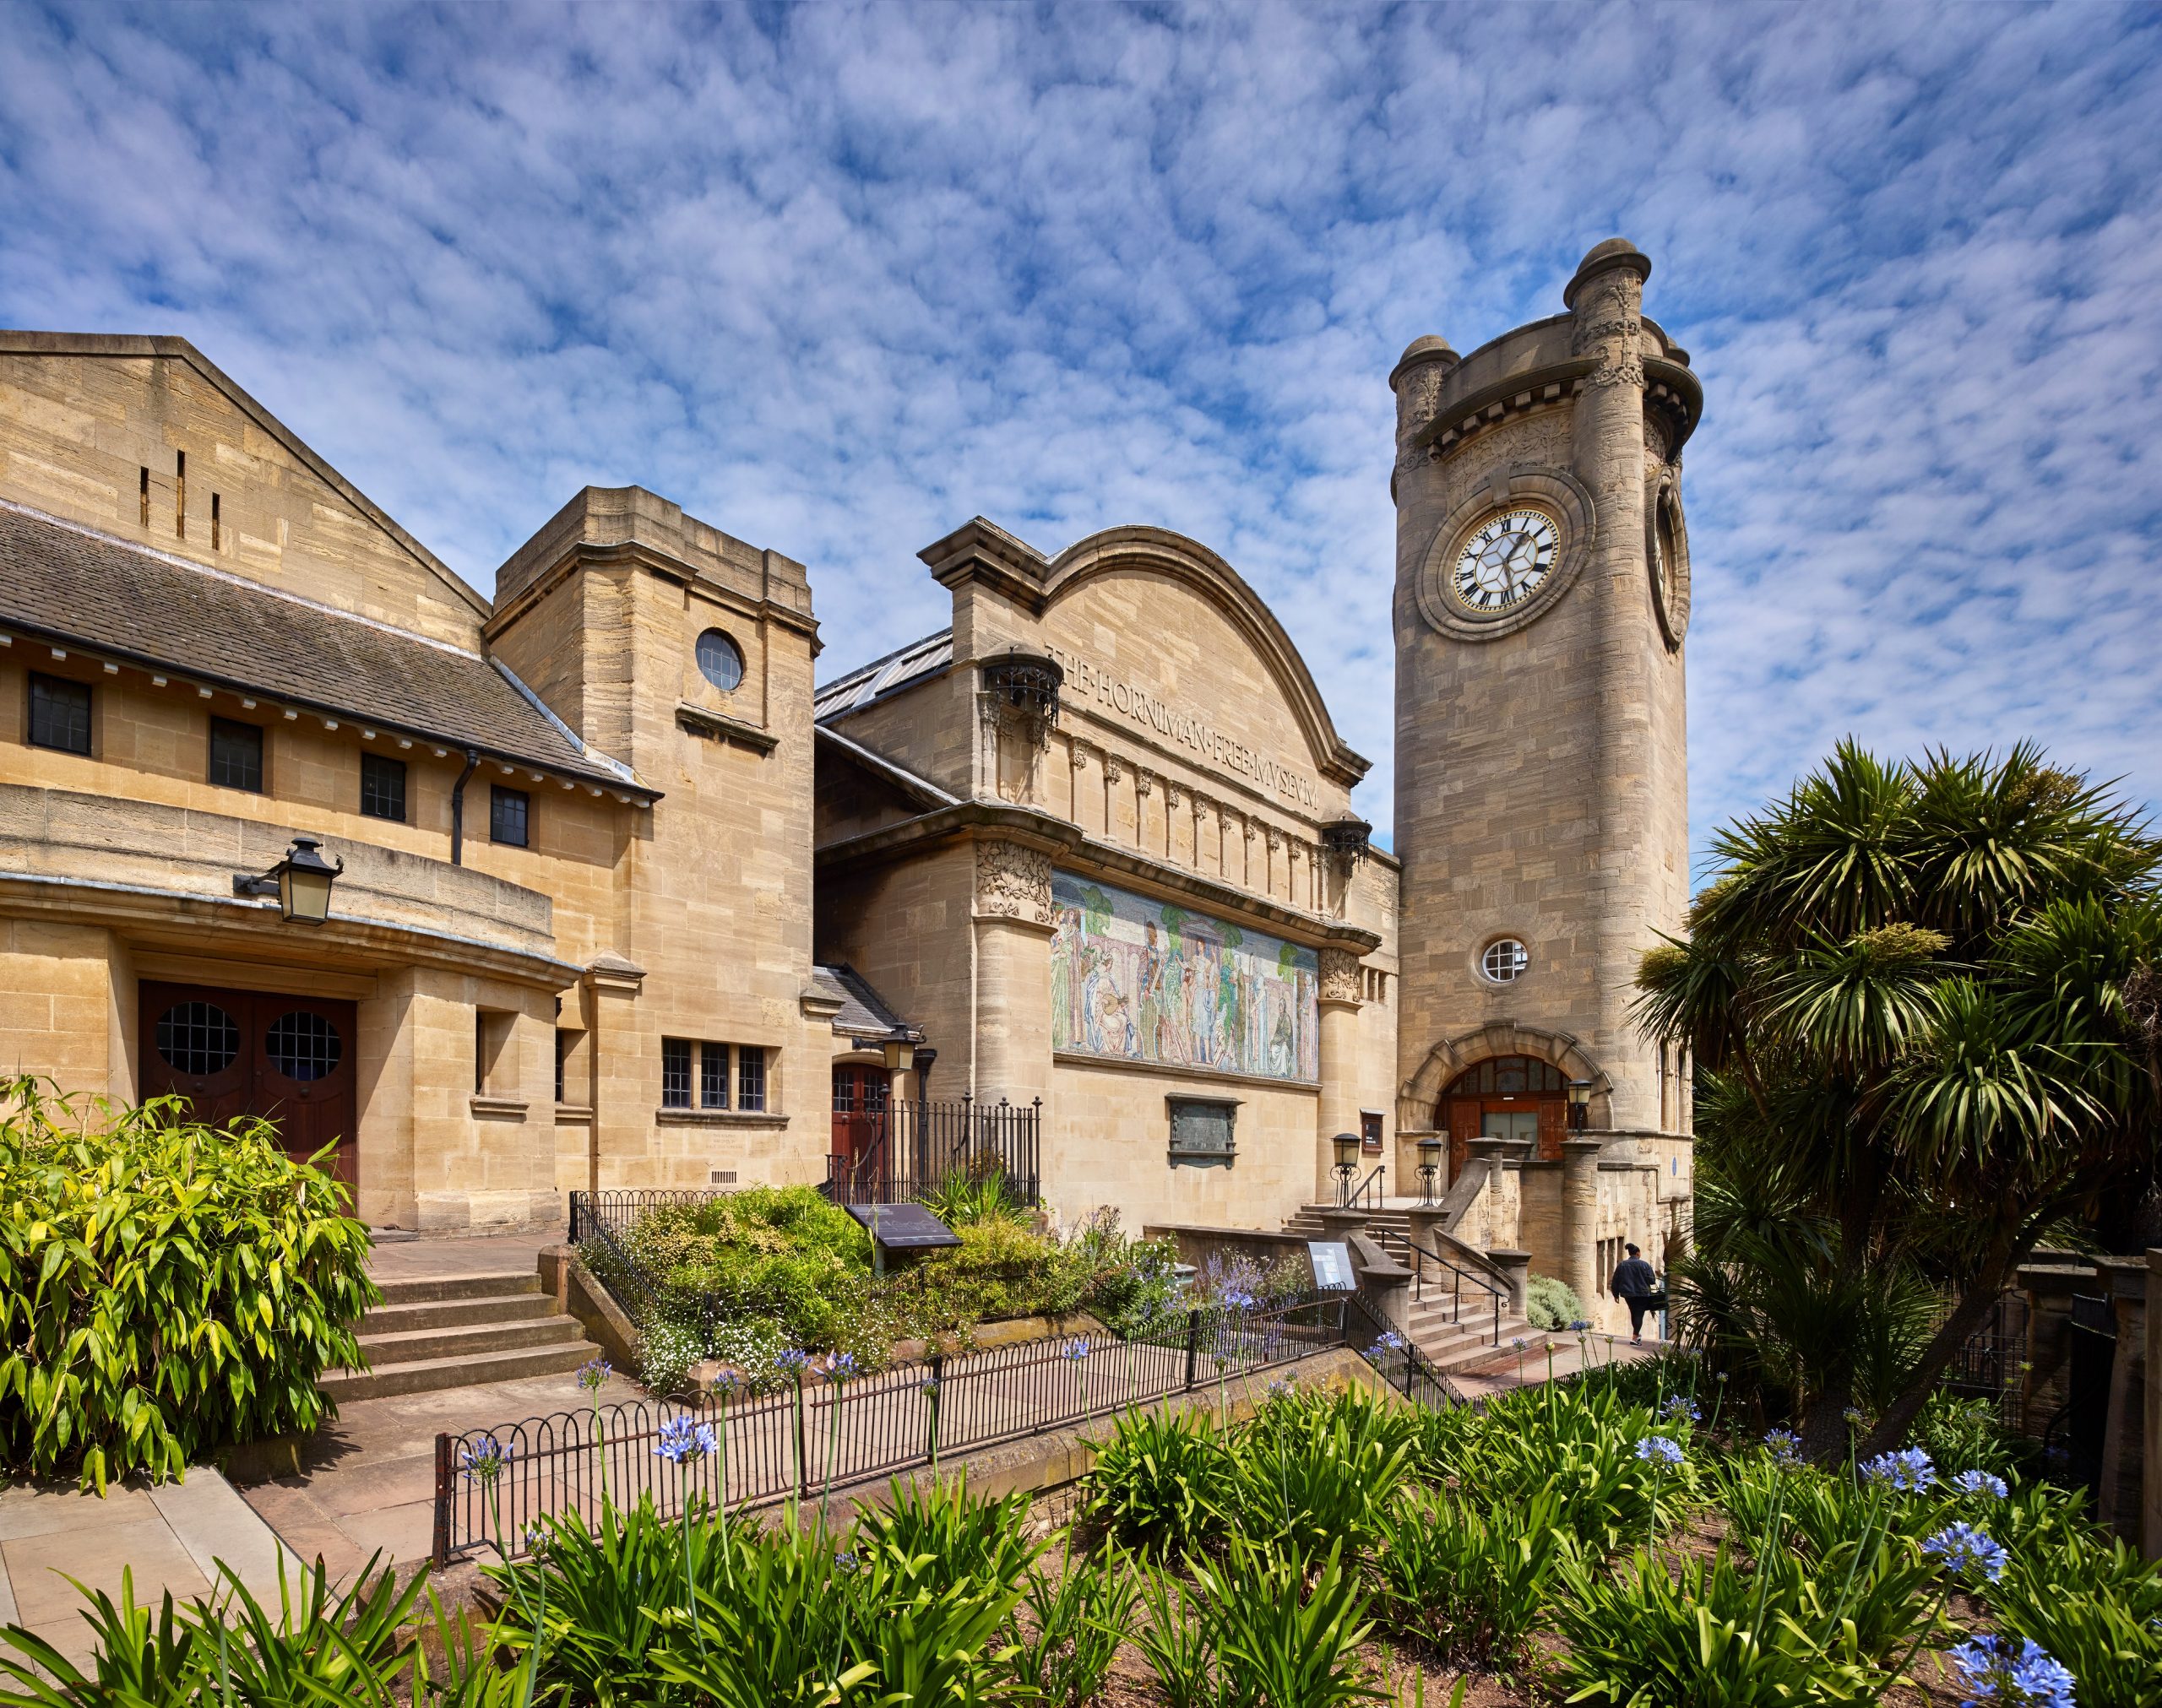 The Horniman Museum and Gardens, London, won last year's prize of £100,000